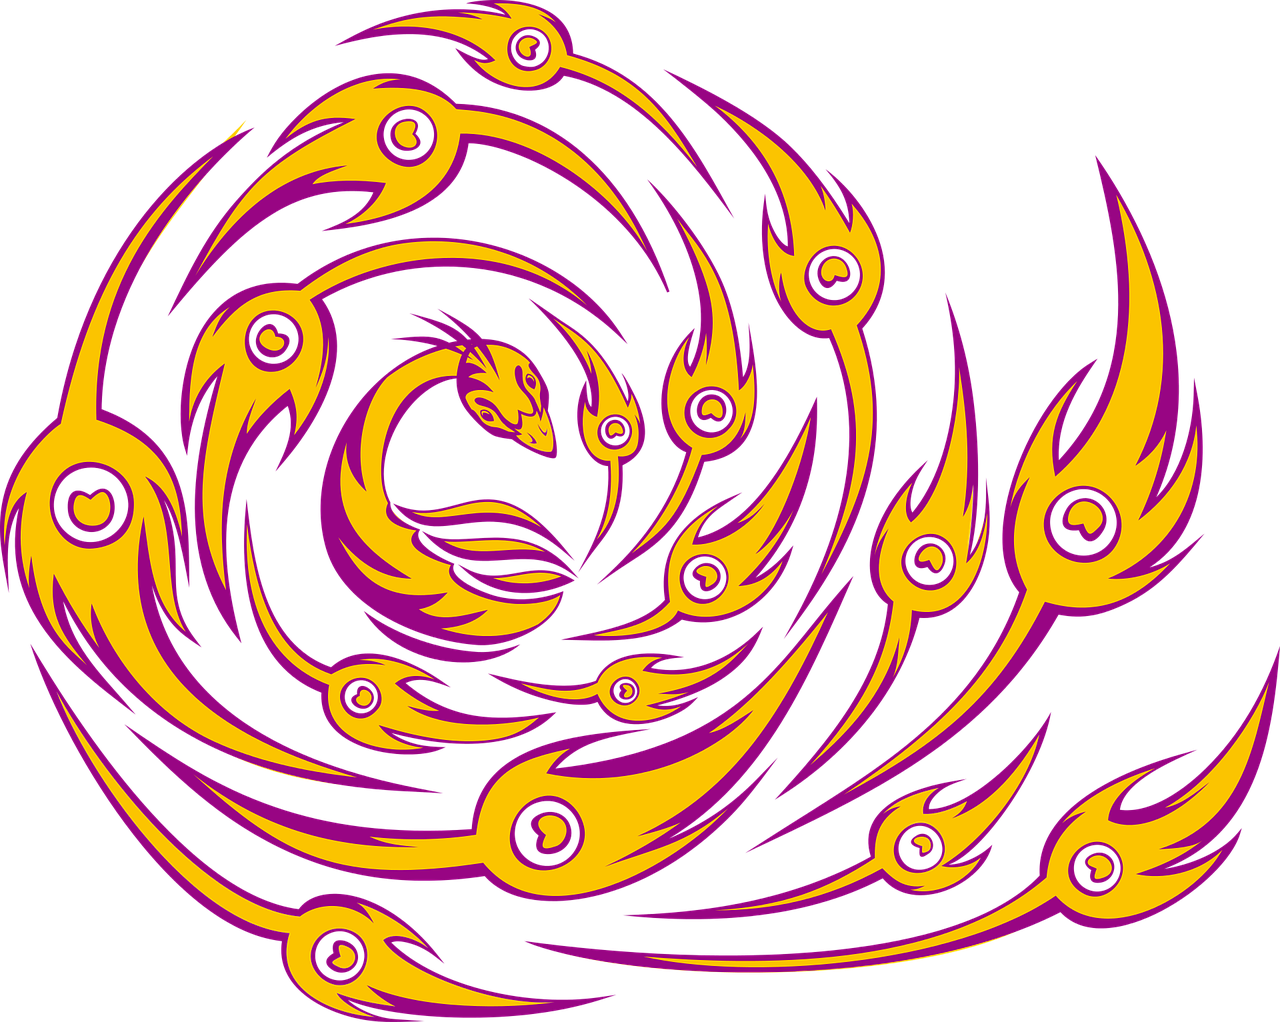 phoenix clipart abstract